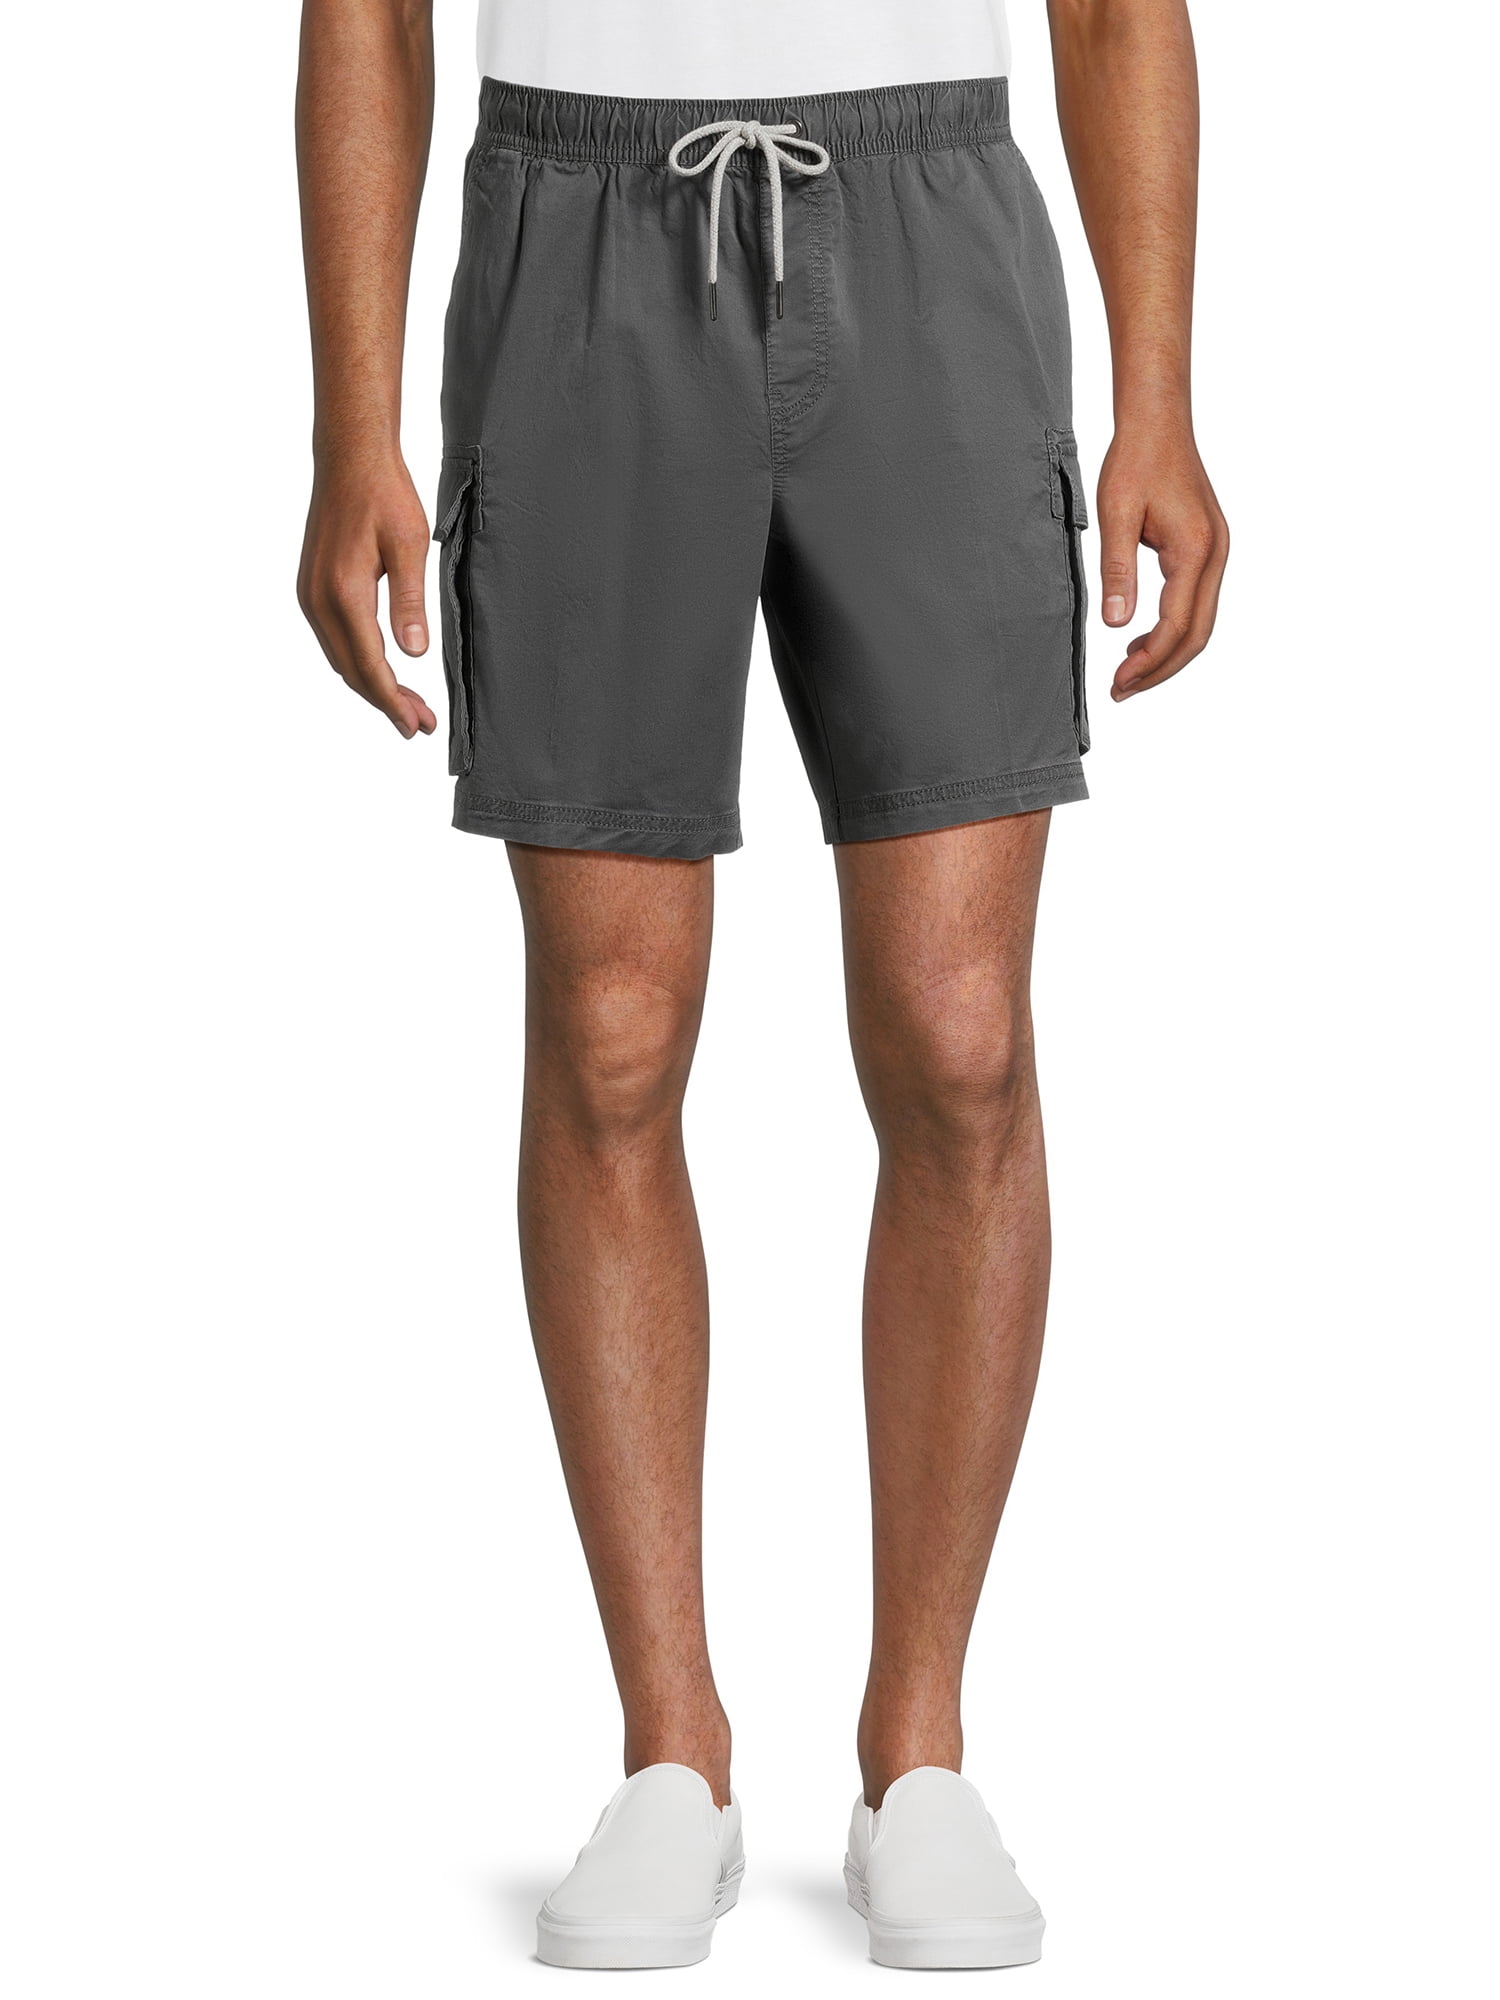 George Men's and Big Men's Pull On Cargo Shorts, Sizes S-2XL - Walmart.com